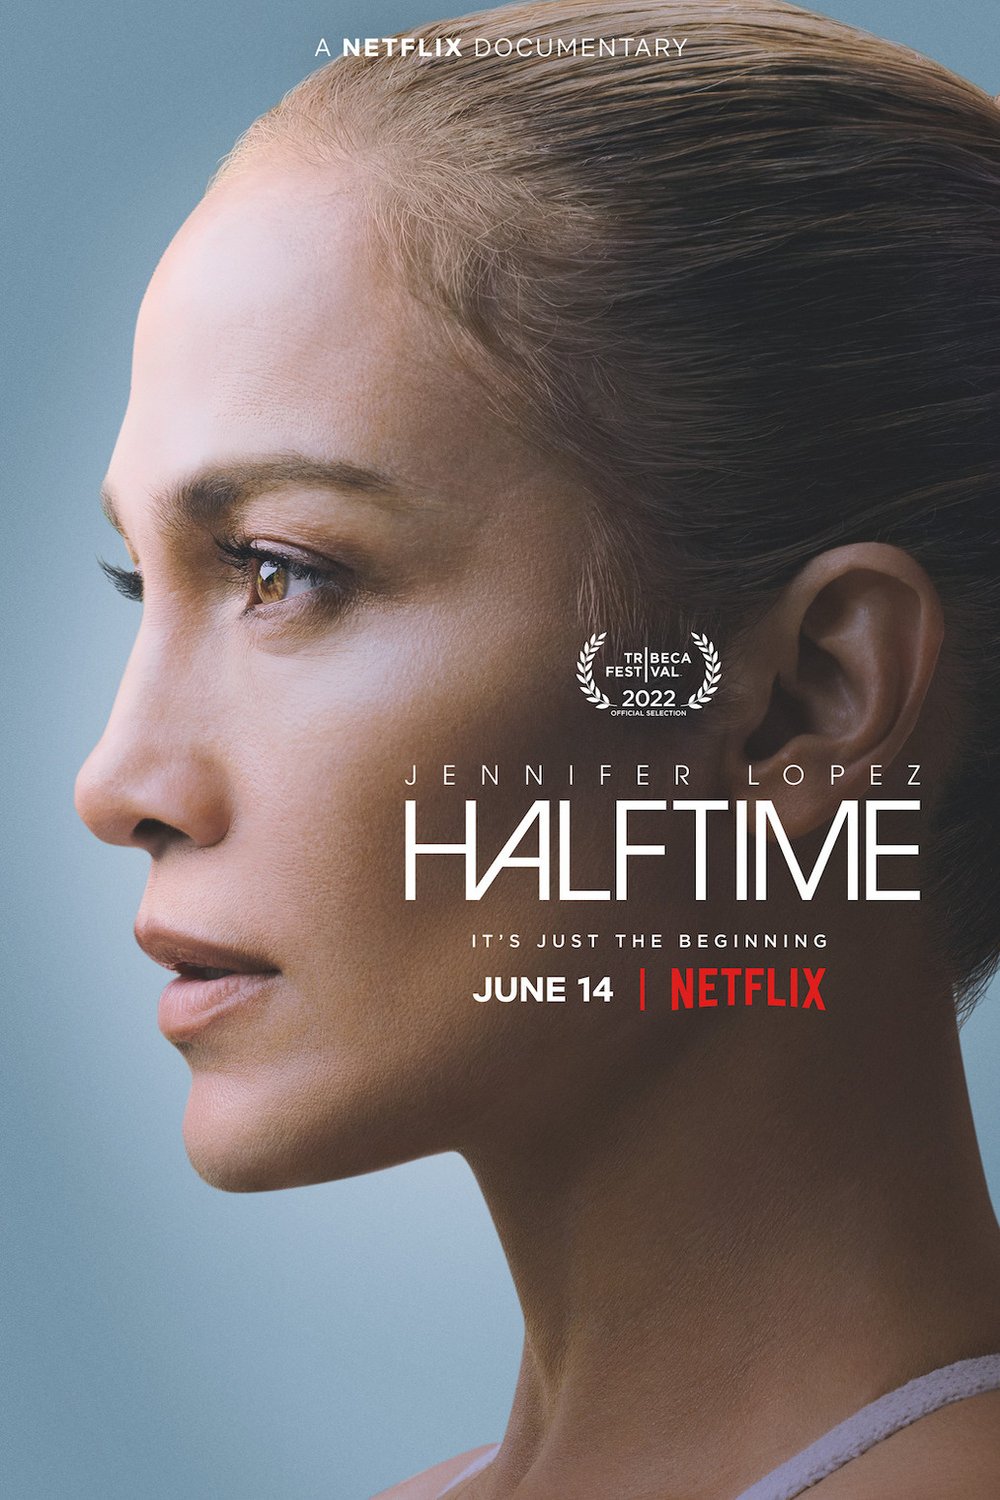 Poster of the movie Halftime